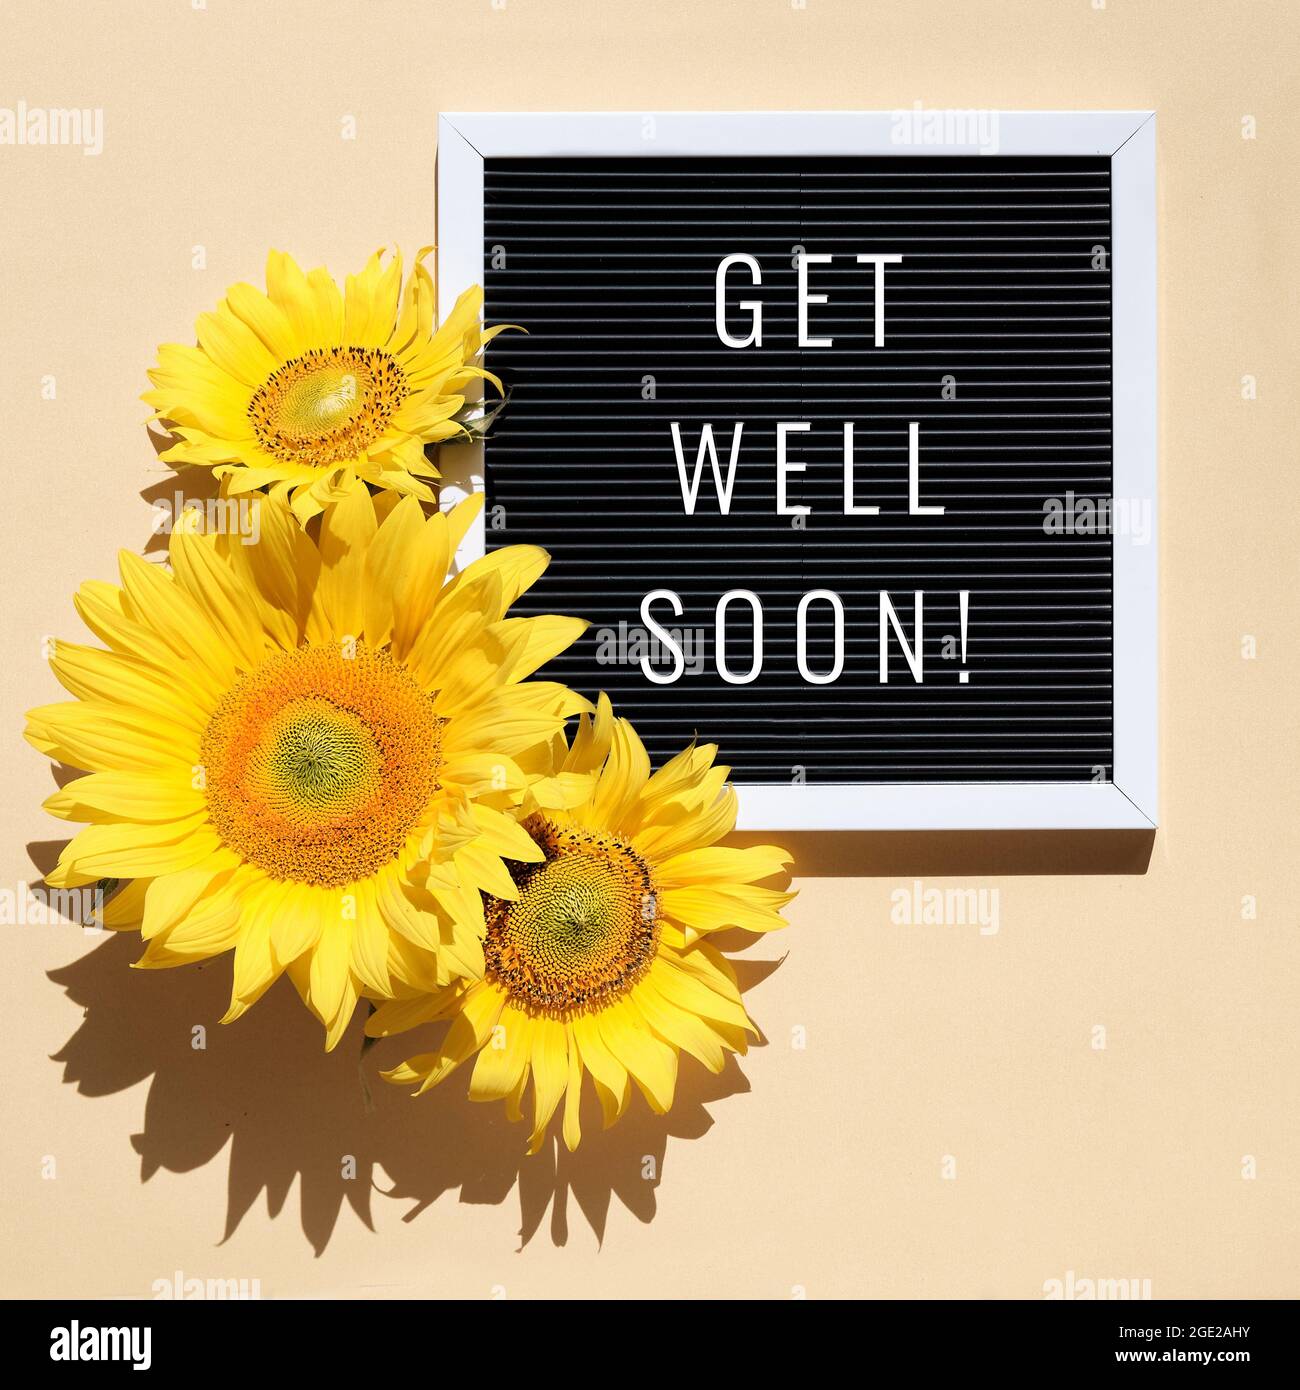 Teddy Bear Holding A Yellow Sign Saying Get Well Soon Stock Photo